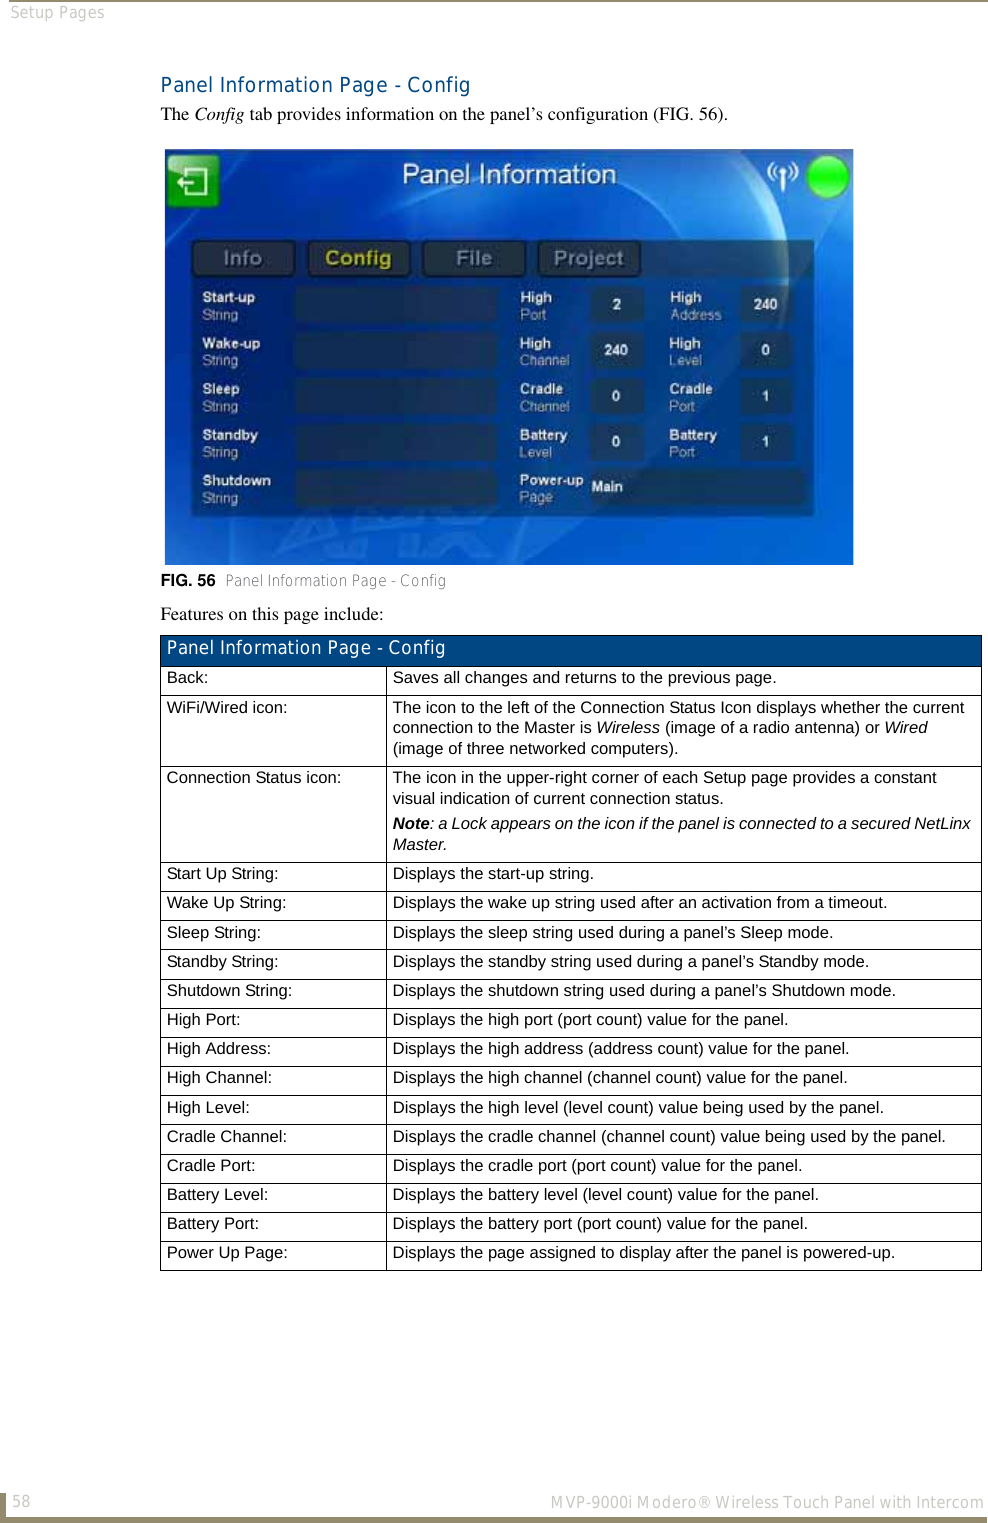 Setup Pages58  MVP-9000i Modero® Wireless Touch Panel with IntercomPanel Information Page - ConfigThe Config tab provides information on the panel’s configuration (FIG. 56).Features on this page include:FIG. 56  Panel Information Page - ConfigPanel Information Page - Config Back: Saves all changes and returns to the previous page.WiFi/Wired icon: The icon to the left of the Connection Status Icon displays whether the current connection to the Master is Wireless (image of a radio antenna) or Wired (image of three networked computers).Connection Status icon: The icon in the upper-right corner of each Setup page provides a constant visual indication of current connection status.Note: a Lock appears on the icon if the panel is connected to a secured NetLinx Master.Start Up String: Displays the start-up string.Wake Up String: Displays the wake up string used after an activation from a timeout.Sleep String: Displays the sleep string used during a panel’s Sleep mode.Standby String: Displays the standby string used during a panel’s Standby mode.Shutdown String: Displays the shutdown string used during a panel’s Shutdown mode.High Port: Displays the high port (port count) value for the panel.High Address: Displays the high address (address count) value for the panel.High Channel: Displays the high channel (channel count) value for the panel.High Level: Displays the high level (level count) value being used by the panel.Cradle Channel: Displays the cradle channel (channel count) value being used by the panel.Cradle Port: Displays the cradle port (port count) value for the panel.Battery Level: Displays the battery level (level count) value for the panel.Battery Port: Displays the battery port (port count) value for the panel.Power Up Page: Displays the page assigned to display after the panel is powered-up.